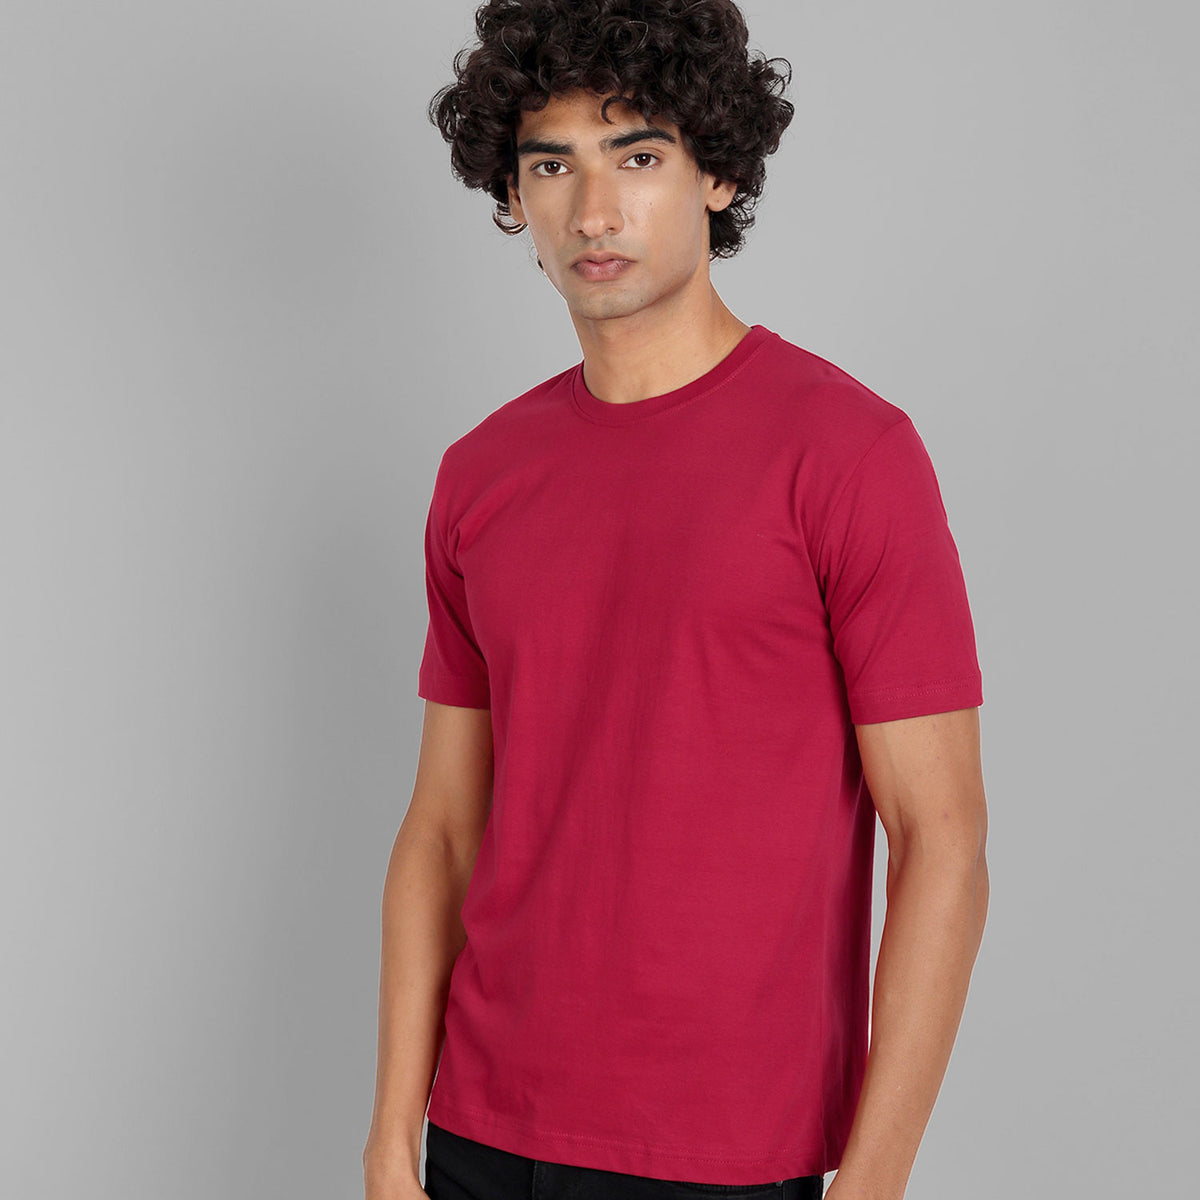 Half Sleeve maroon and Black T-shirt Combo For Men